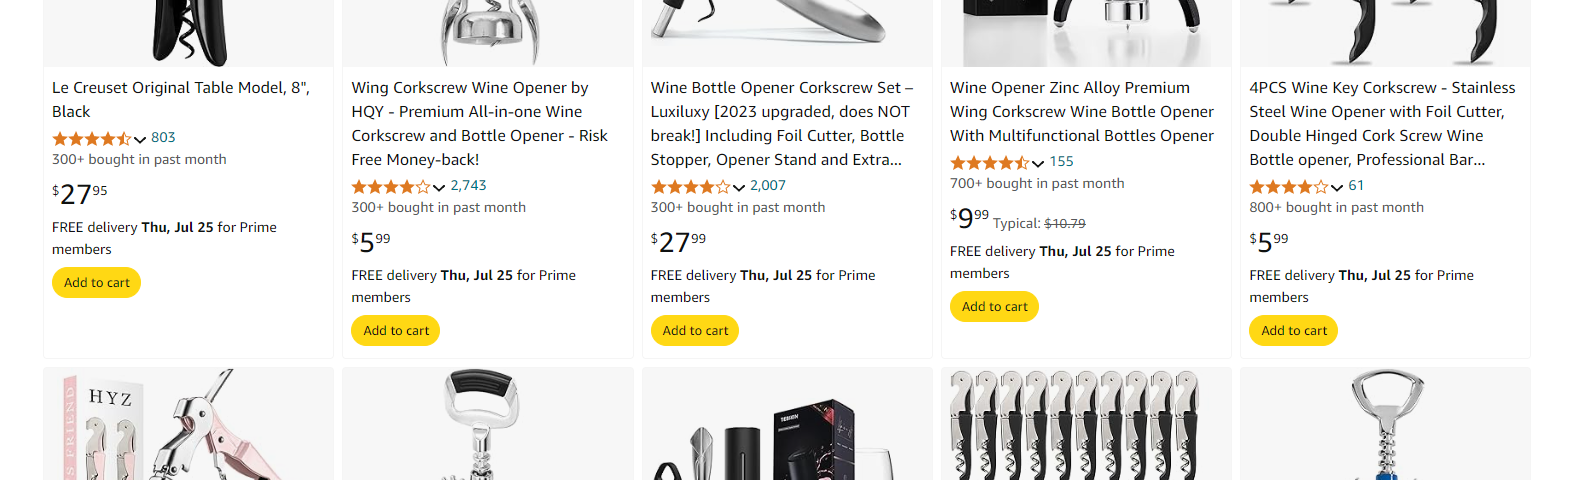 Screenshot of an Amazon page showing rows of corkscrews for sale in various shapes, colors, and prices